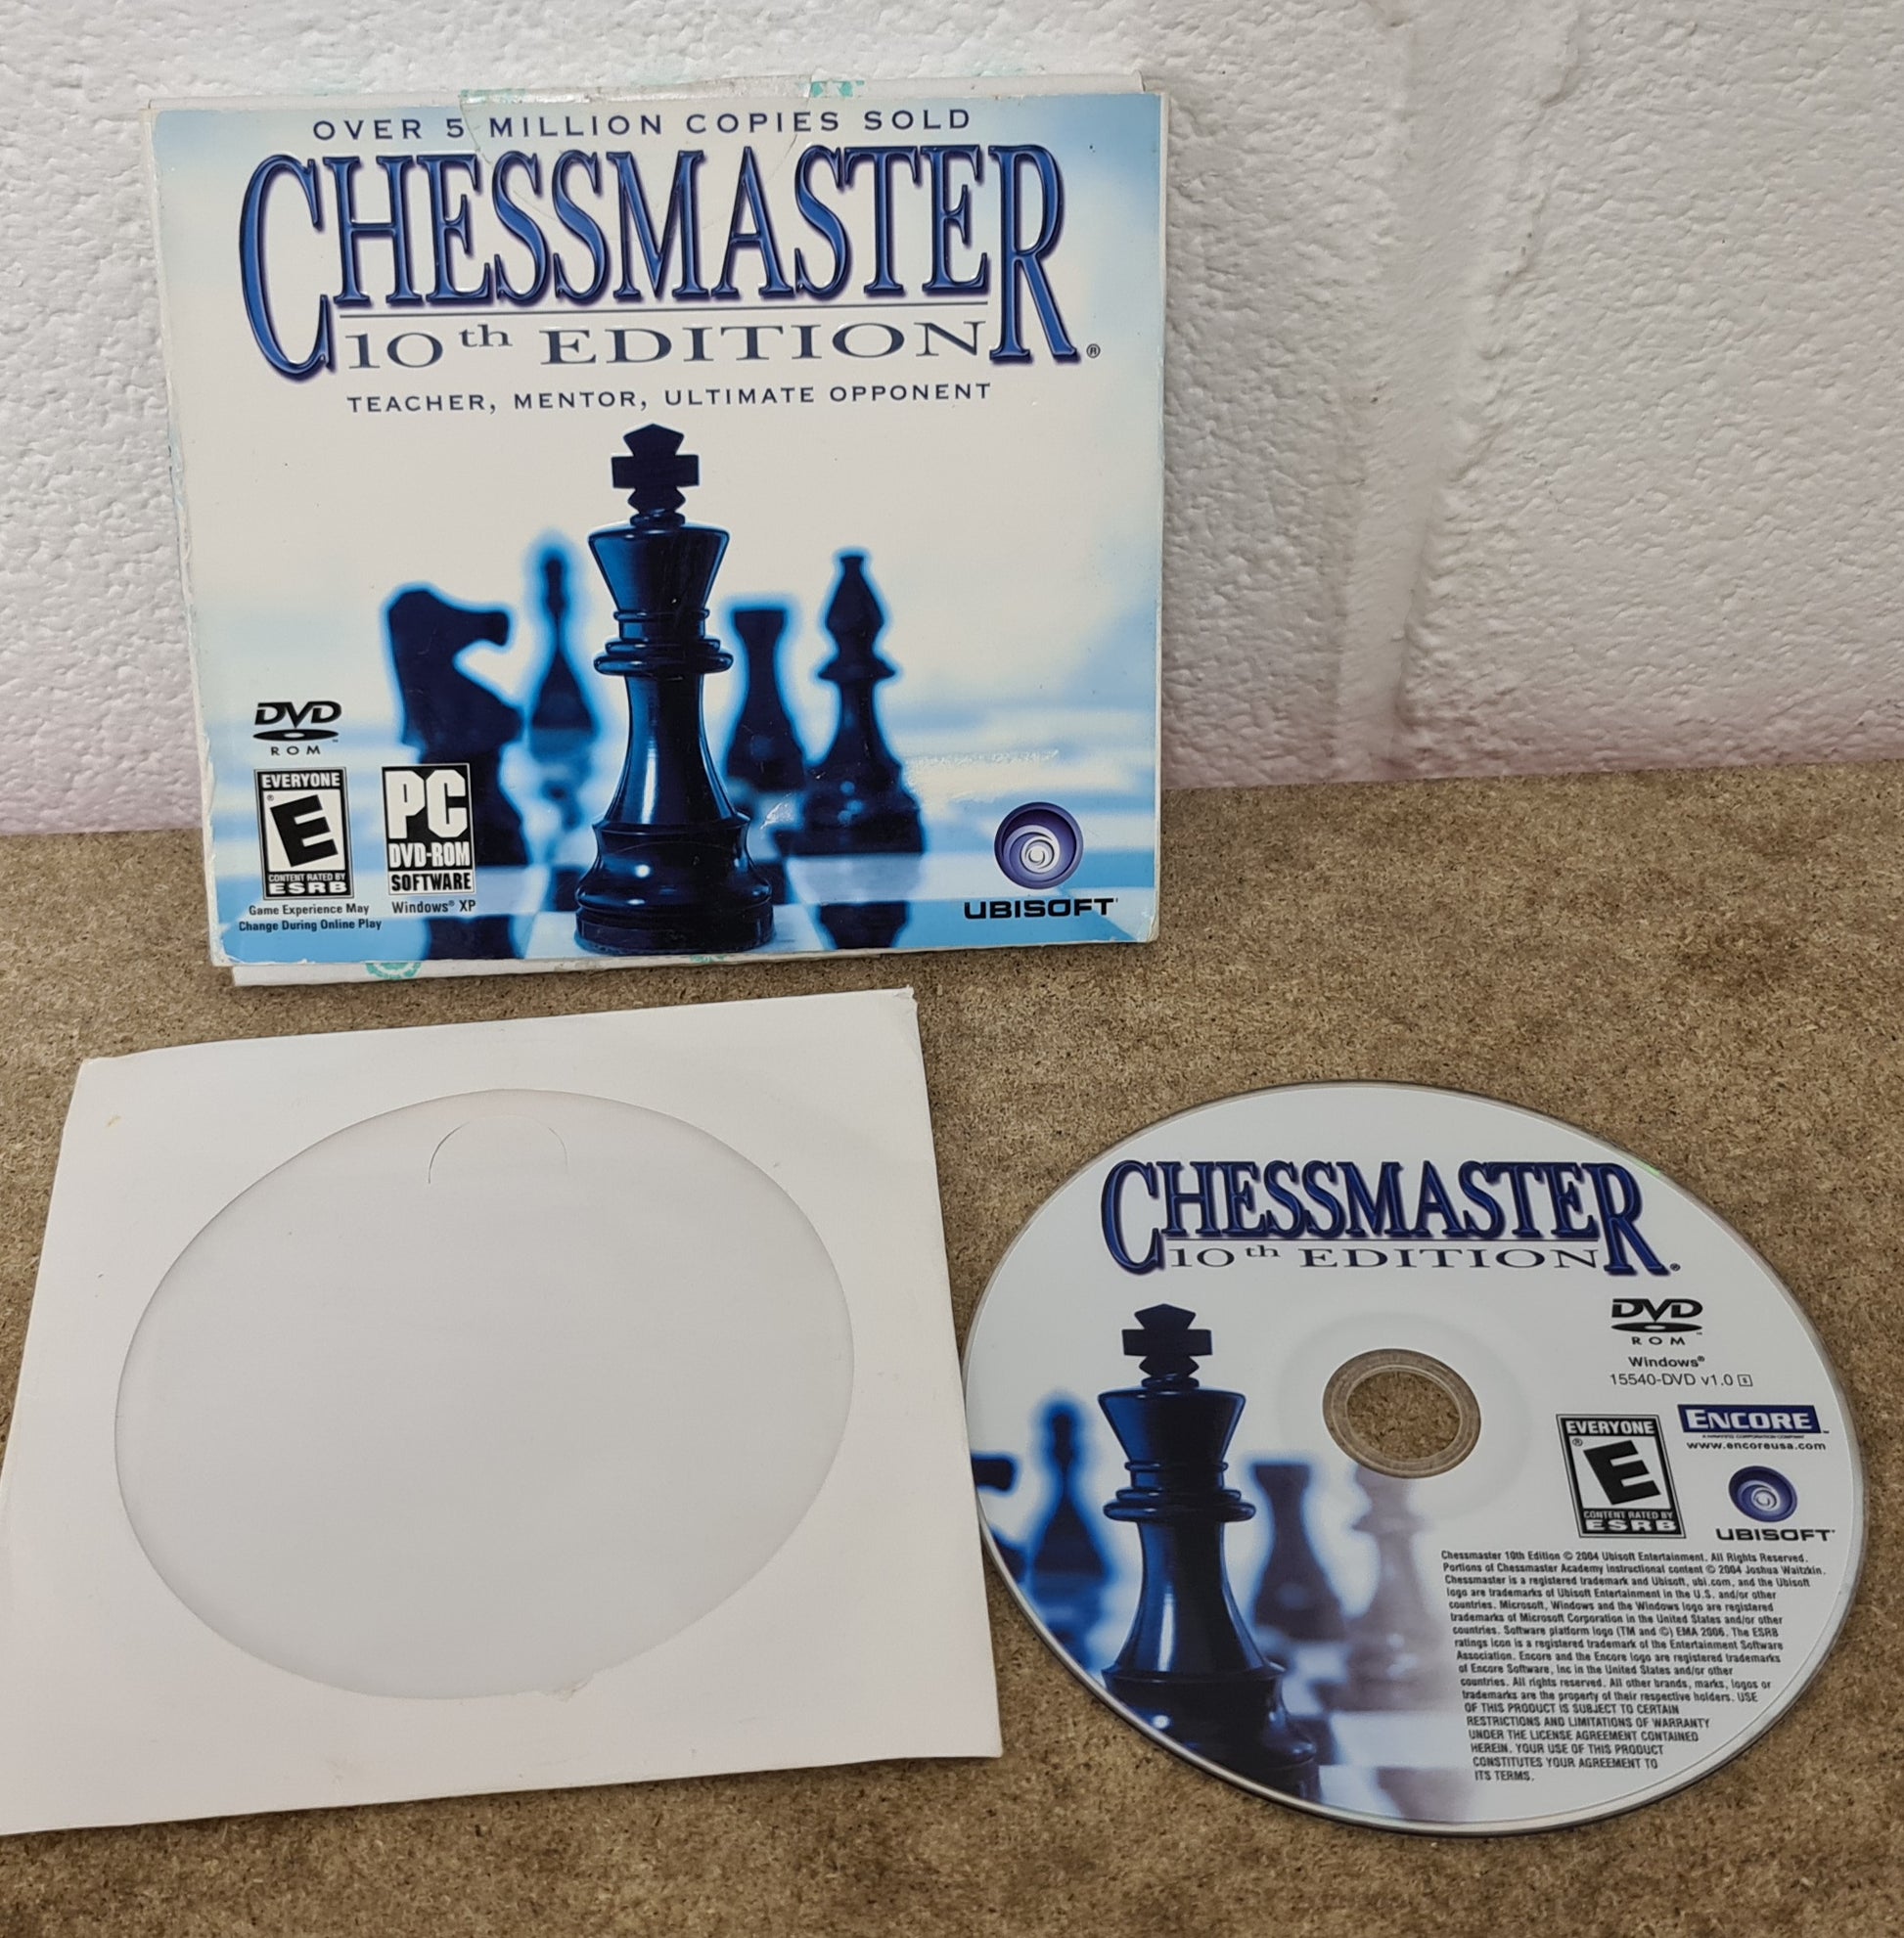  Chessmaster 10th edition (PC) (UK) : Video Games